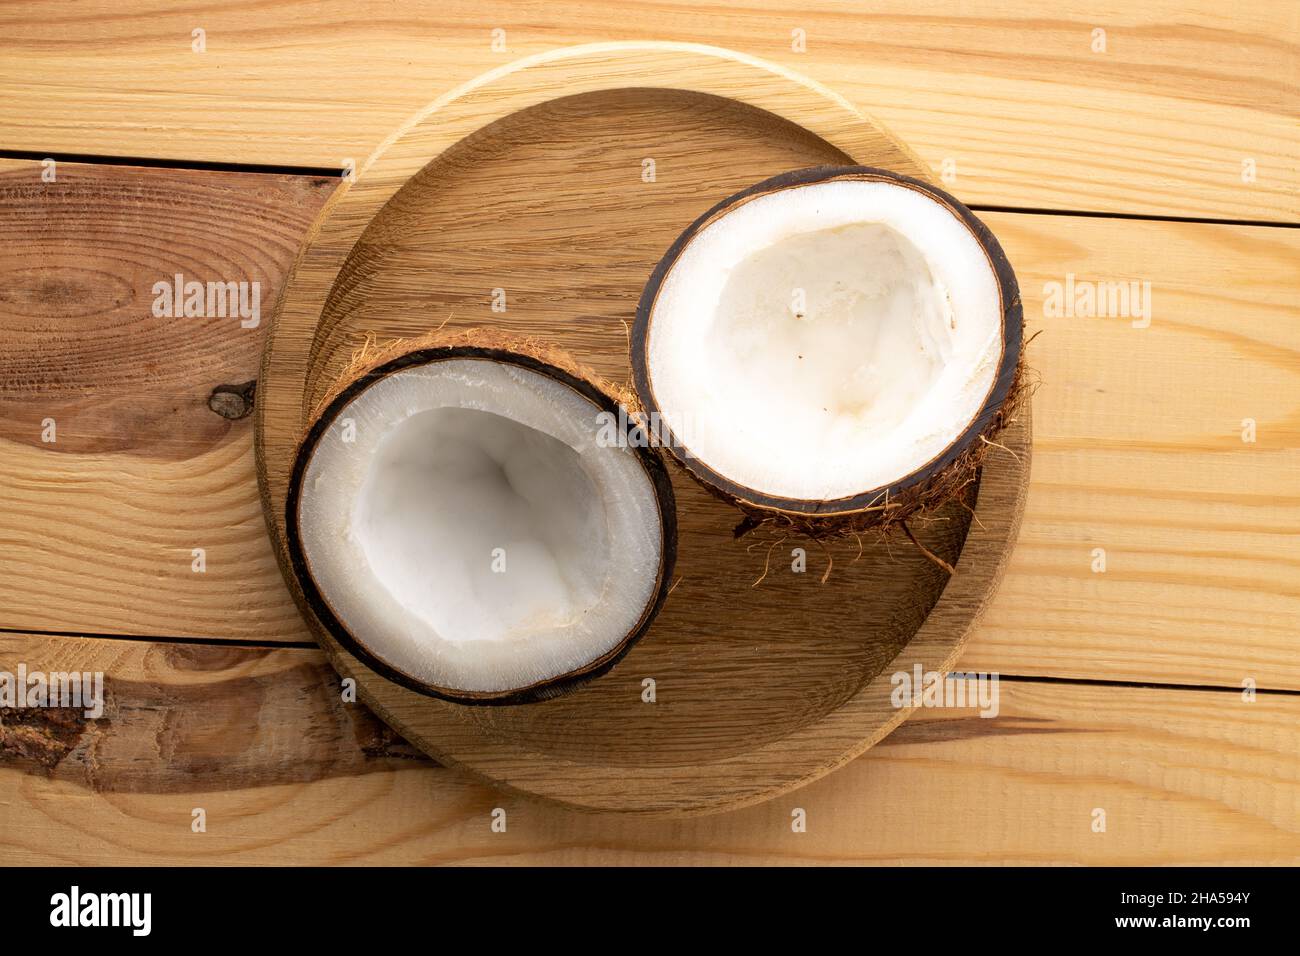 Two halves of fresh coconut on a wooden table, close-up, top view. Stock Photo